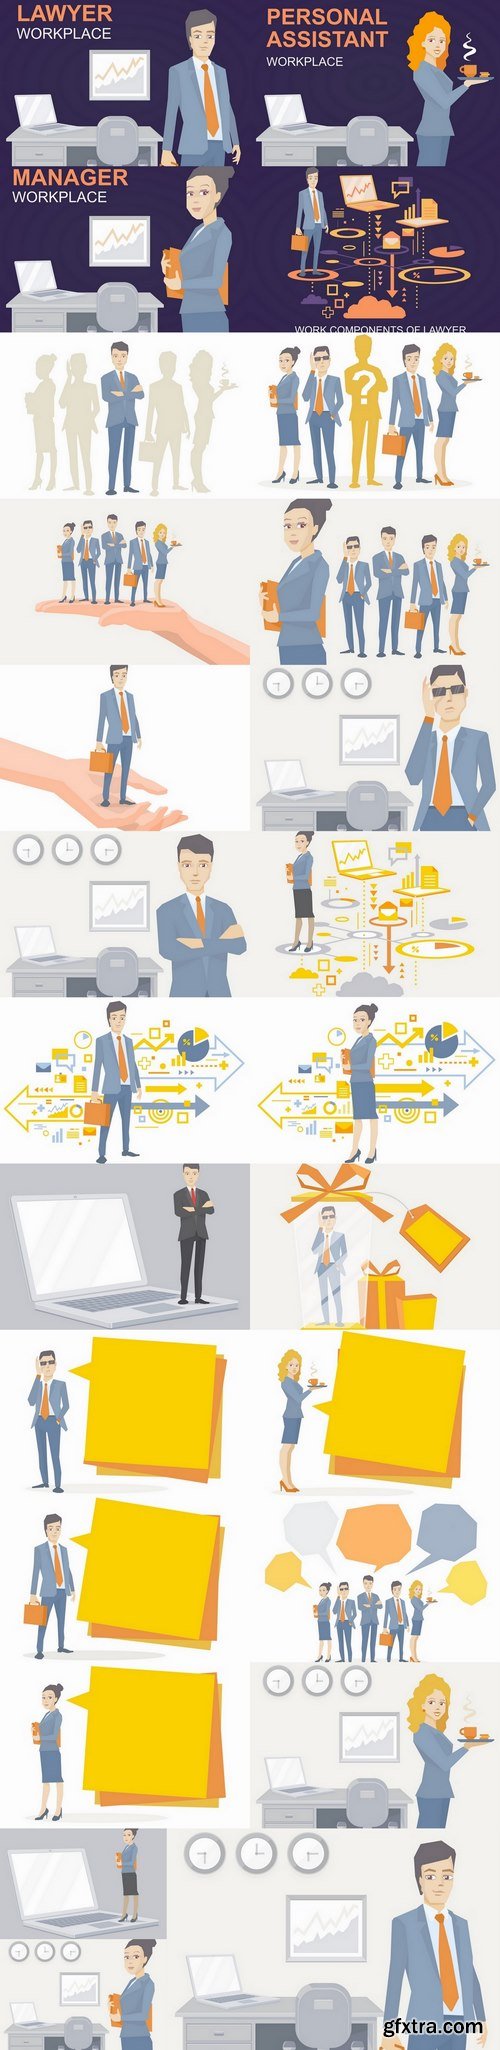 Business people vector image 25 Eps